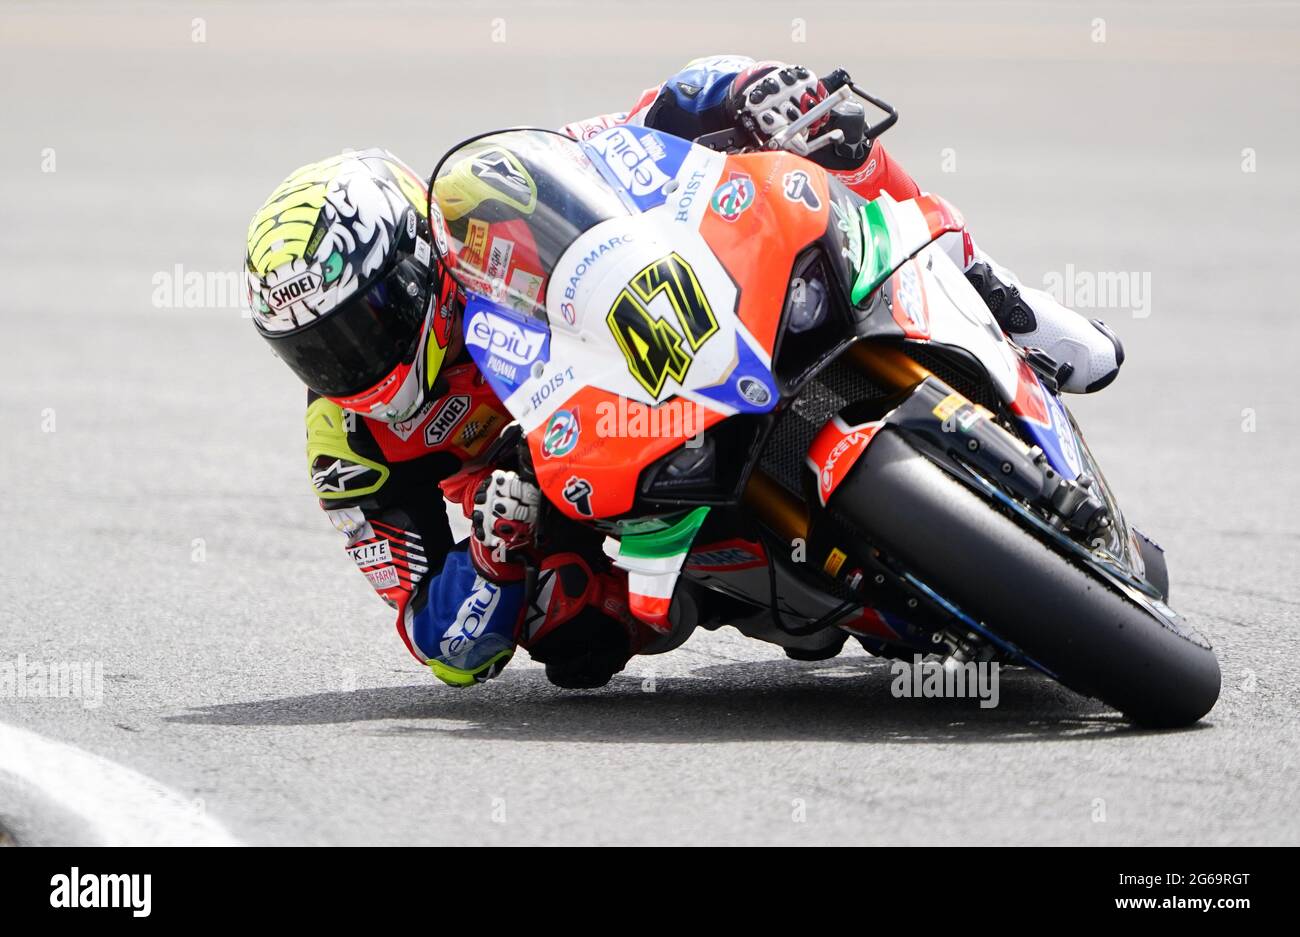 Axel Bassani of Motocorsa Racing in Race 2 during day two of the Motul Fim Superbike Championship 2021 at Donington Park, Leicestershire. Saturday July 4, 2021. Stock Photo